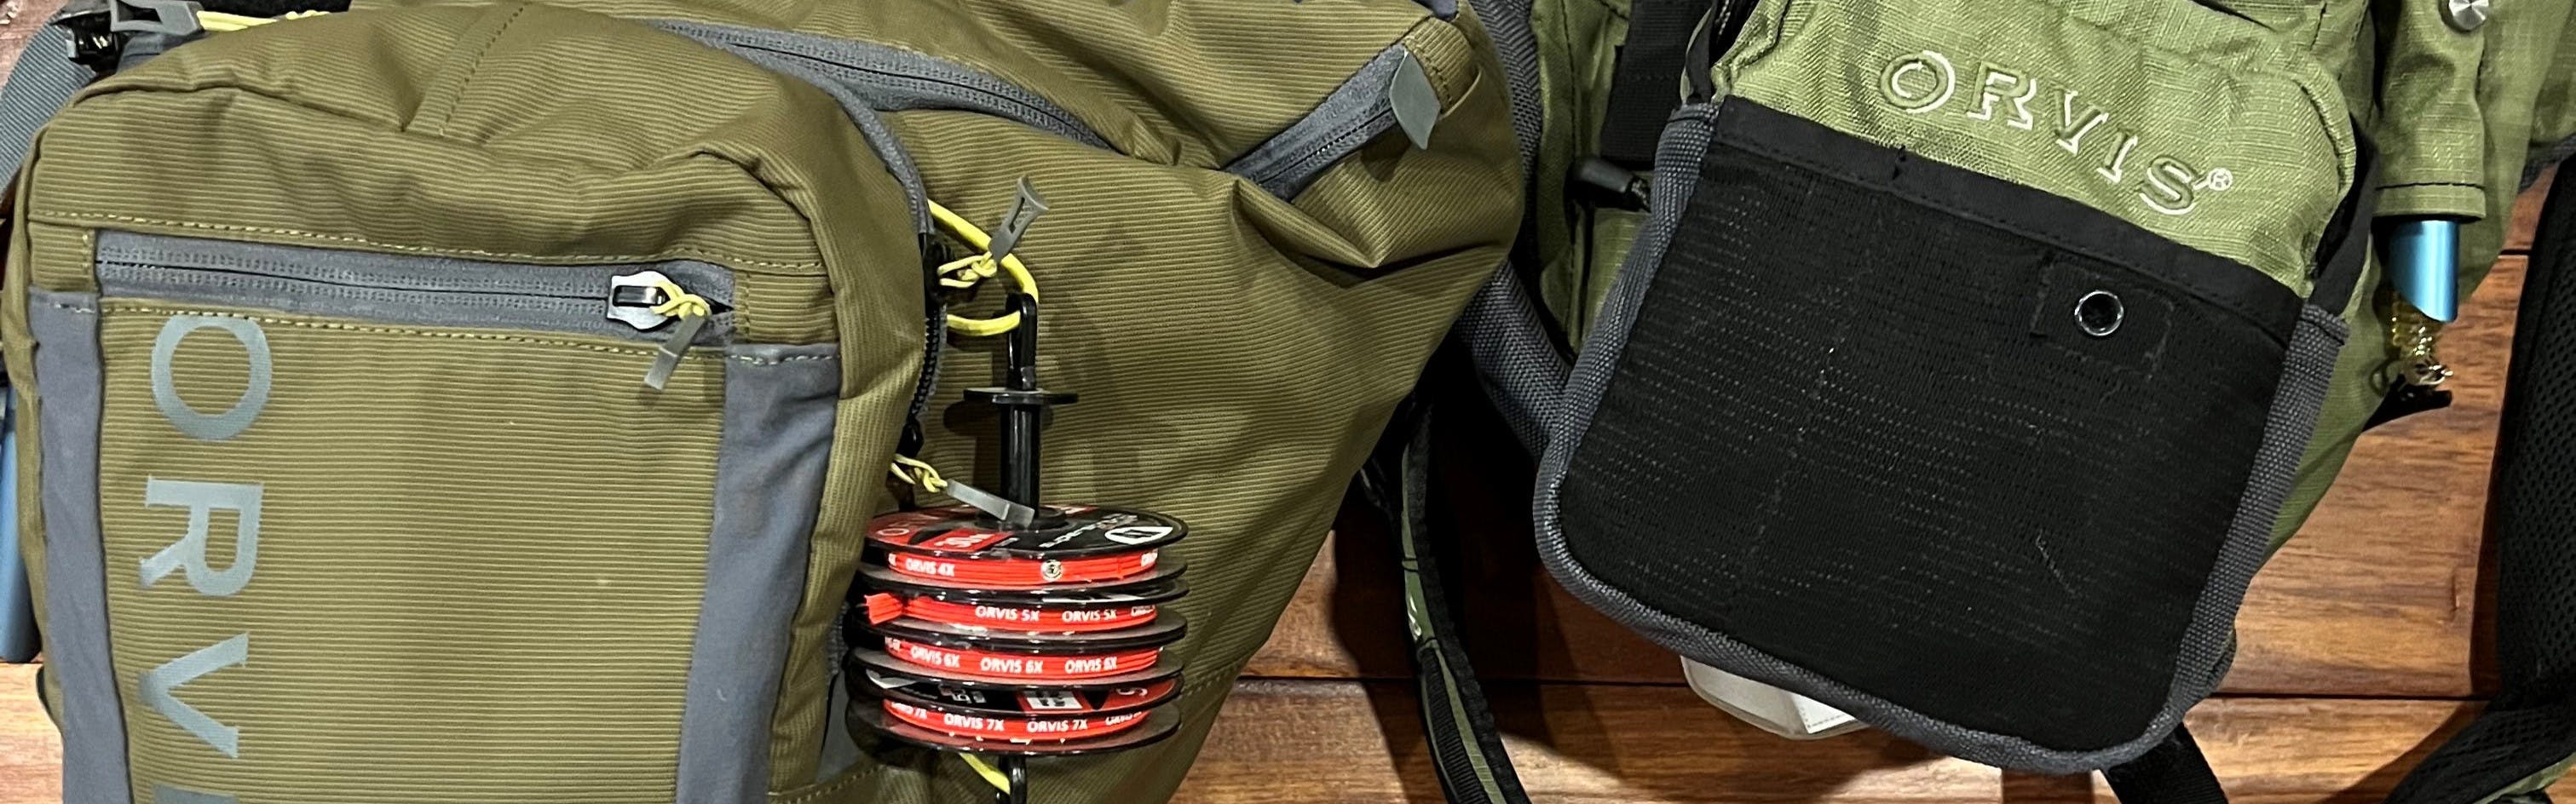 Choosing the Best Fly Fishing Pack: Chest, Sling, or Something